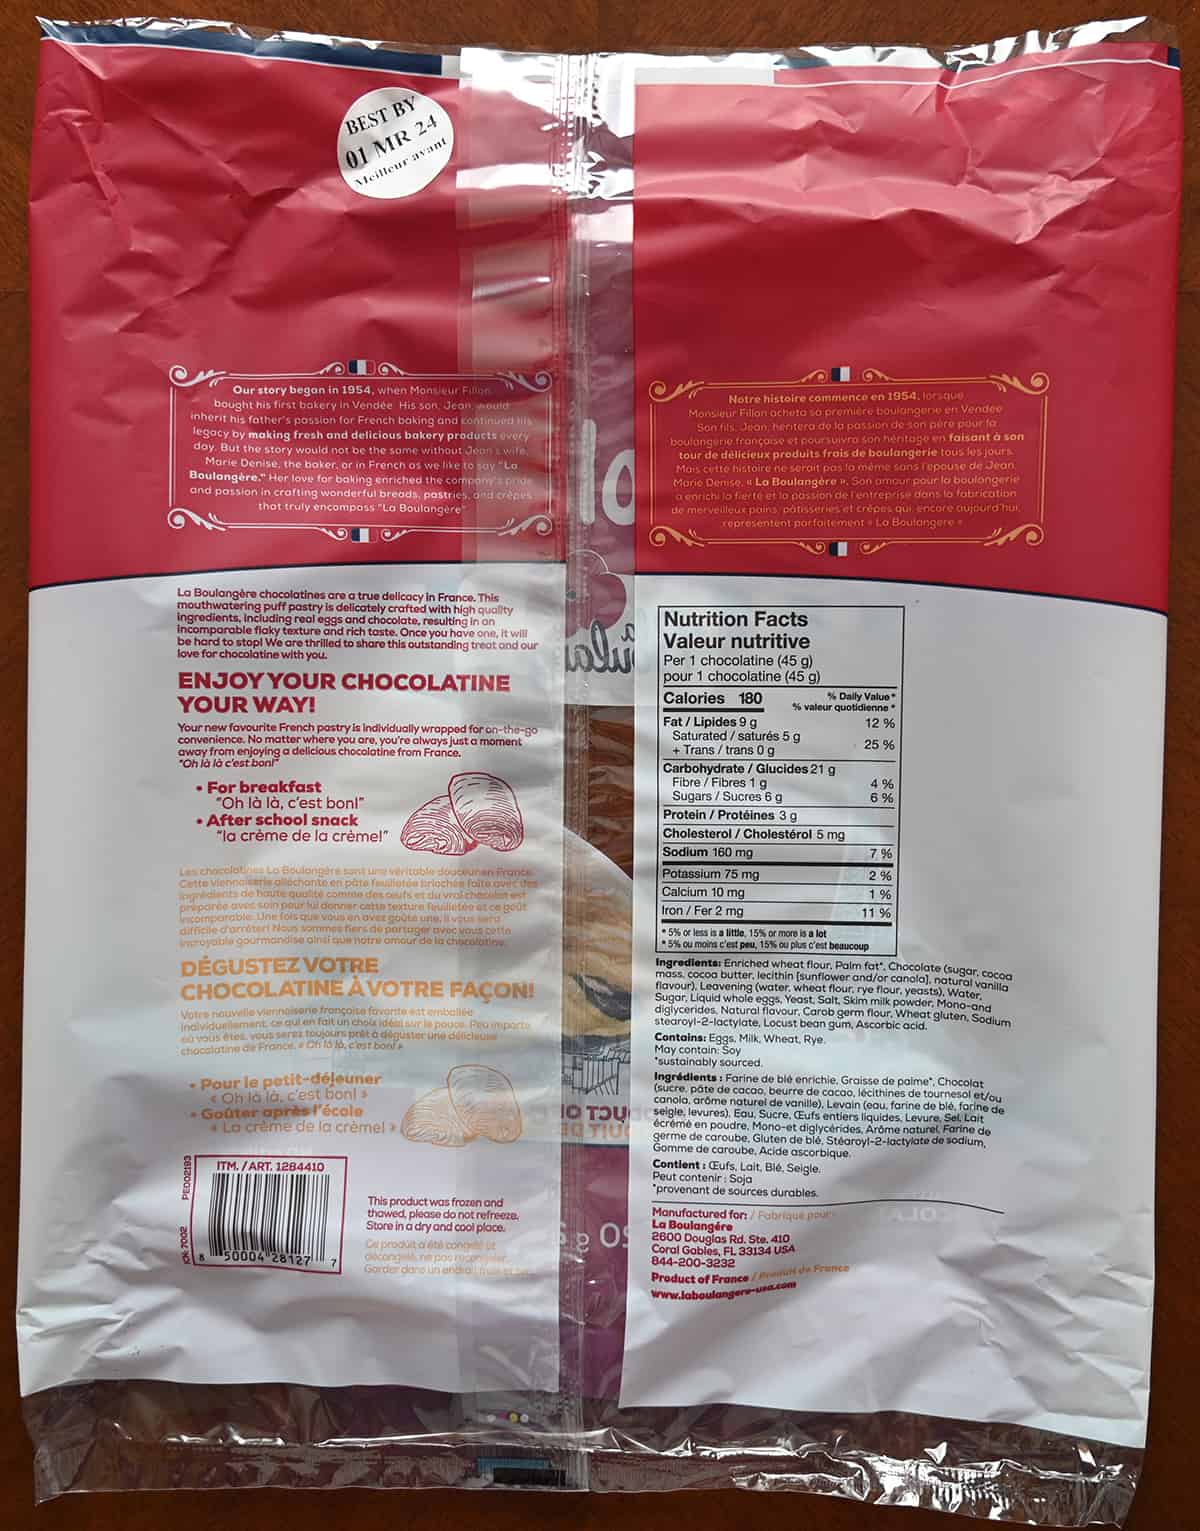 Image of the back of the bag of the Chocolatines showing ingredients, product description, when to eat and nutrition facts.